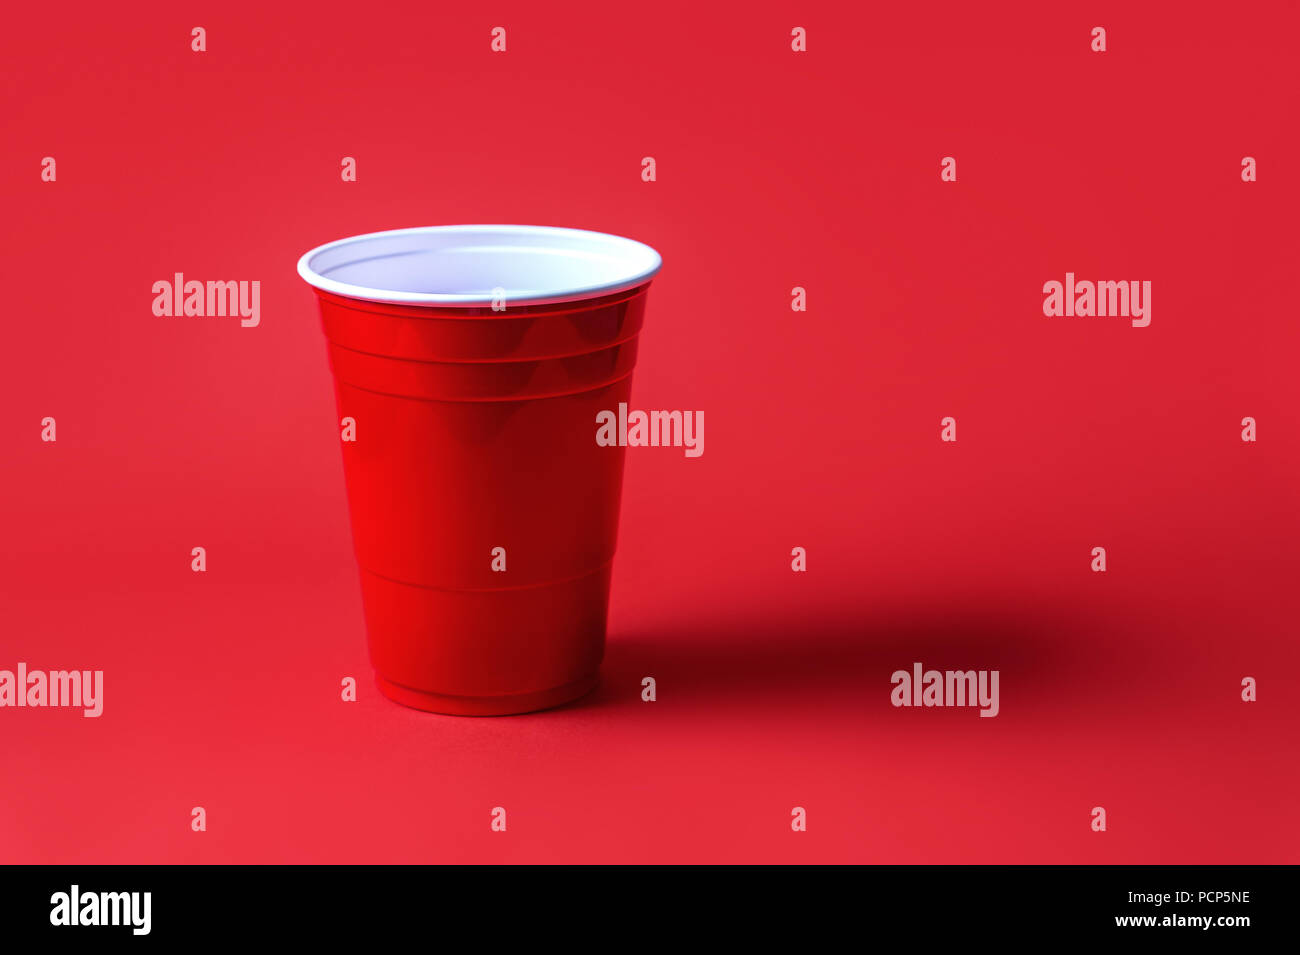 Red party cup on red background. Beer pong tournament or college celebration concept. Stock Photo